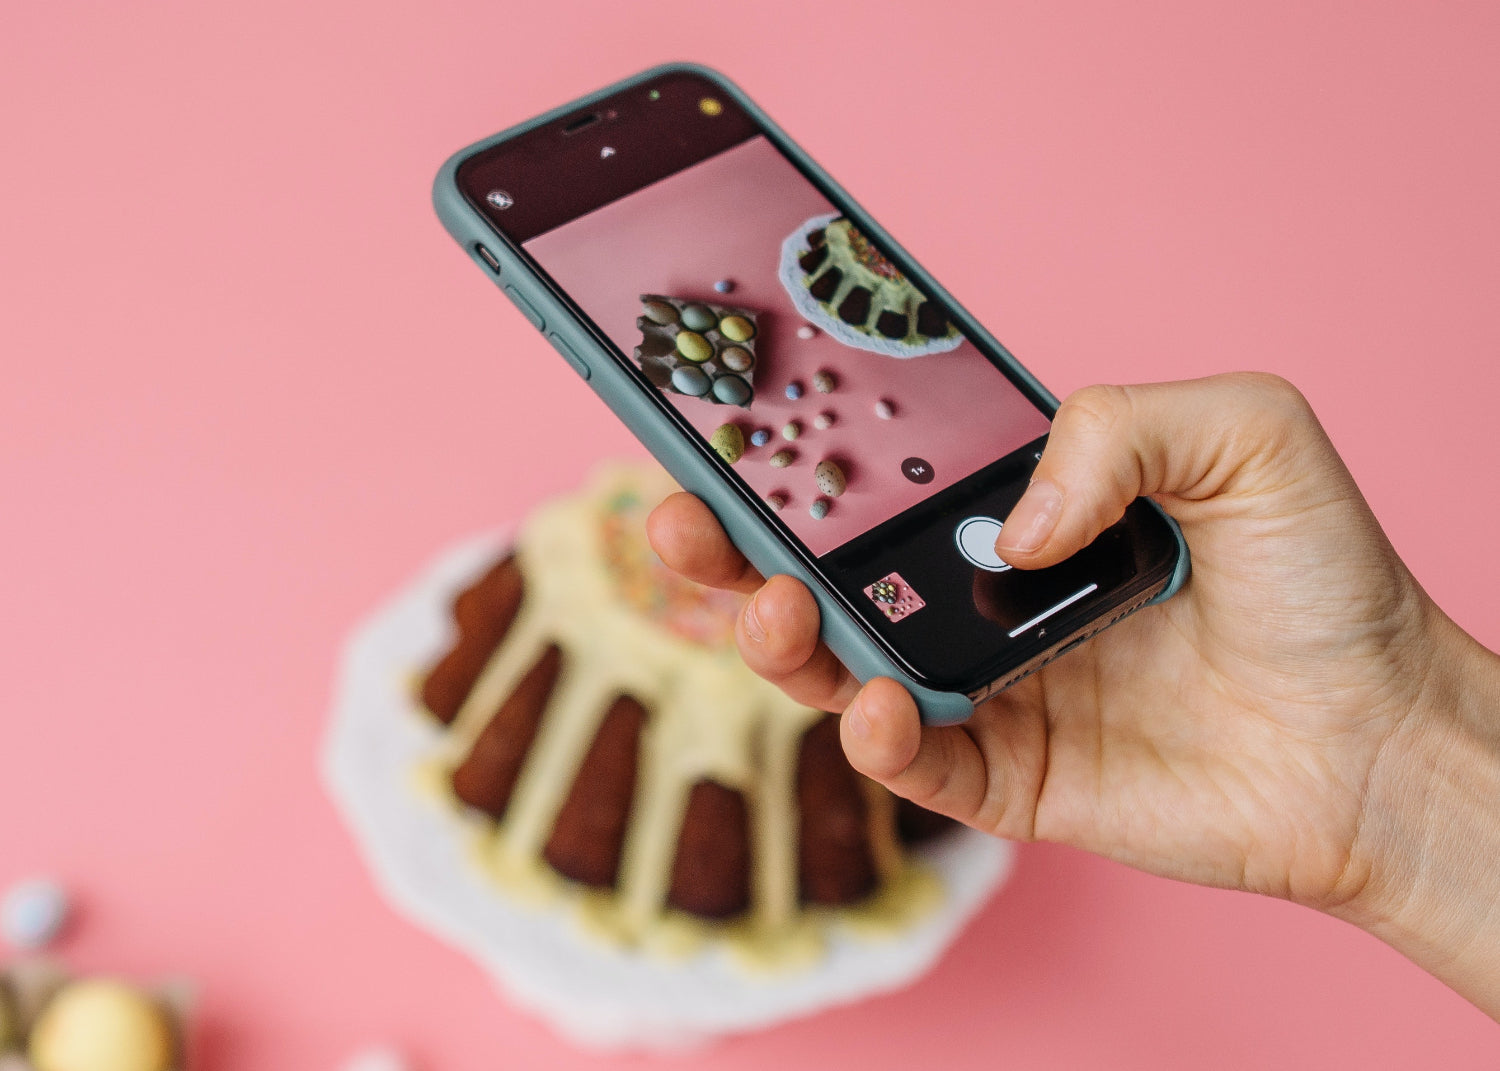 Close cropped image of a hand holding a mobile phone taking a photo of a cake